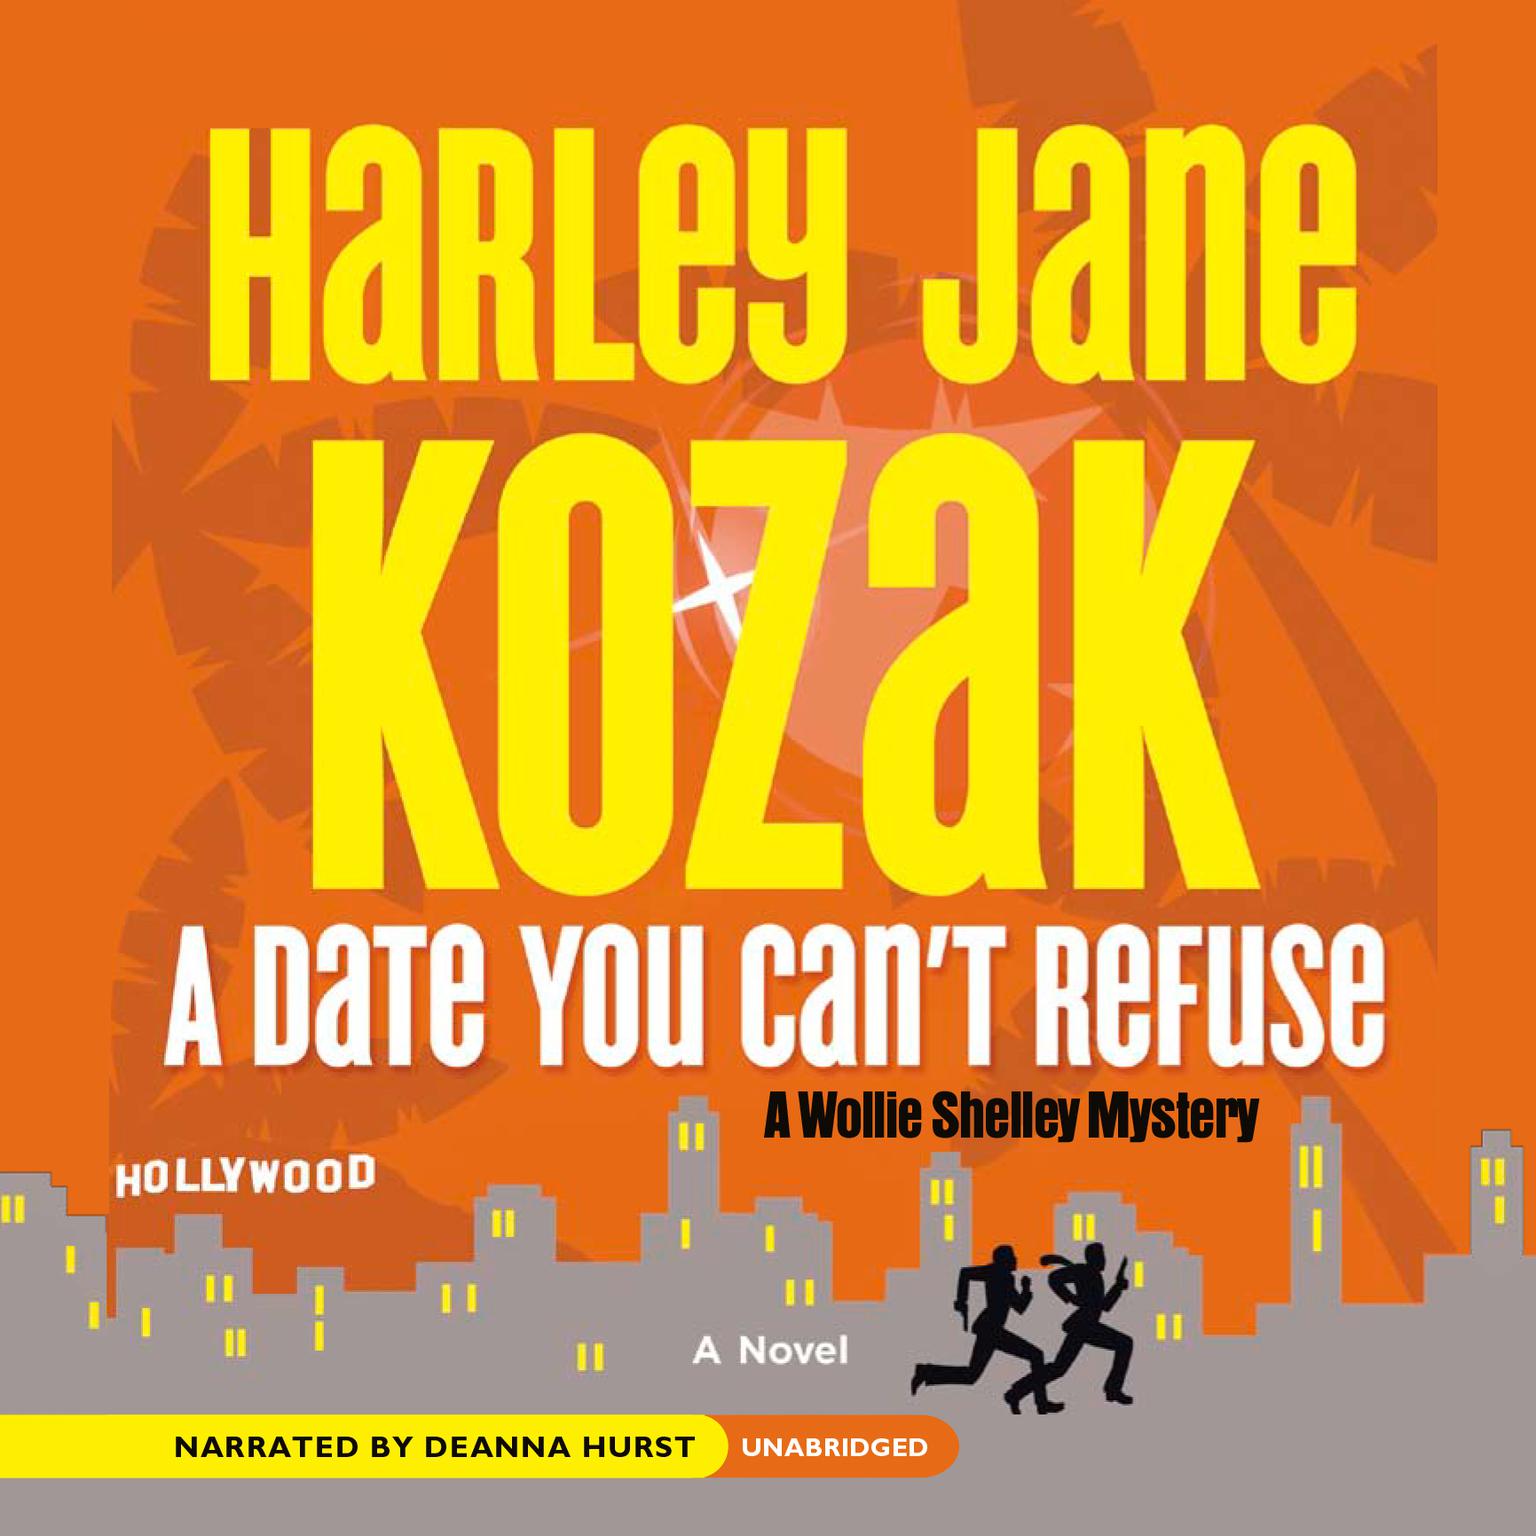 A Date You Can’t Refuse Audiobook, by Harley Jane Kozak